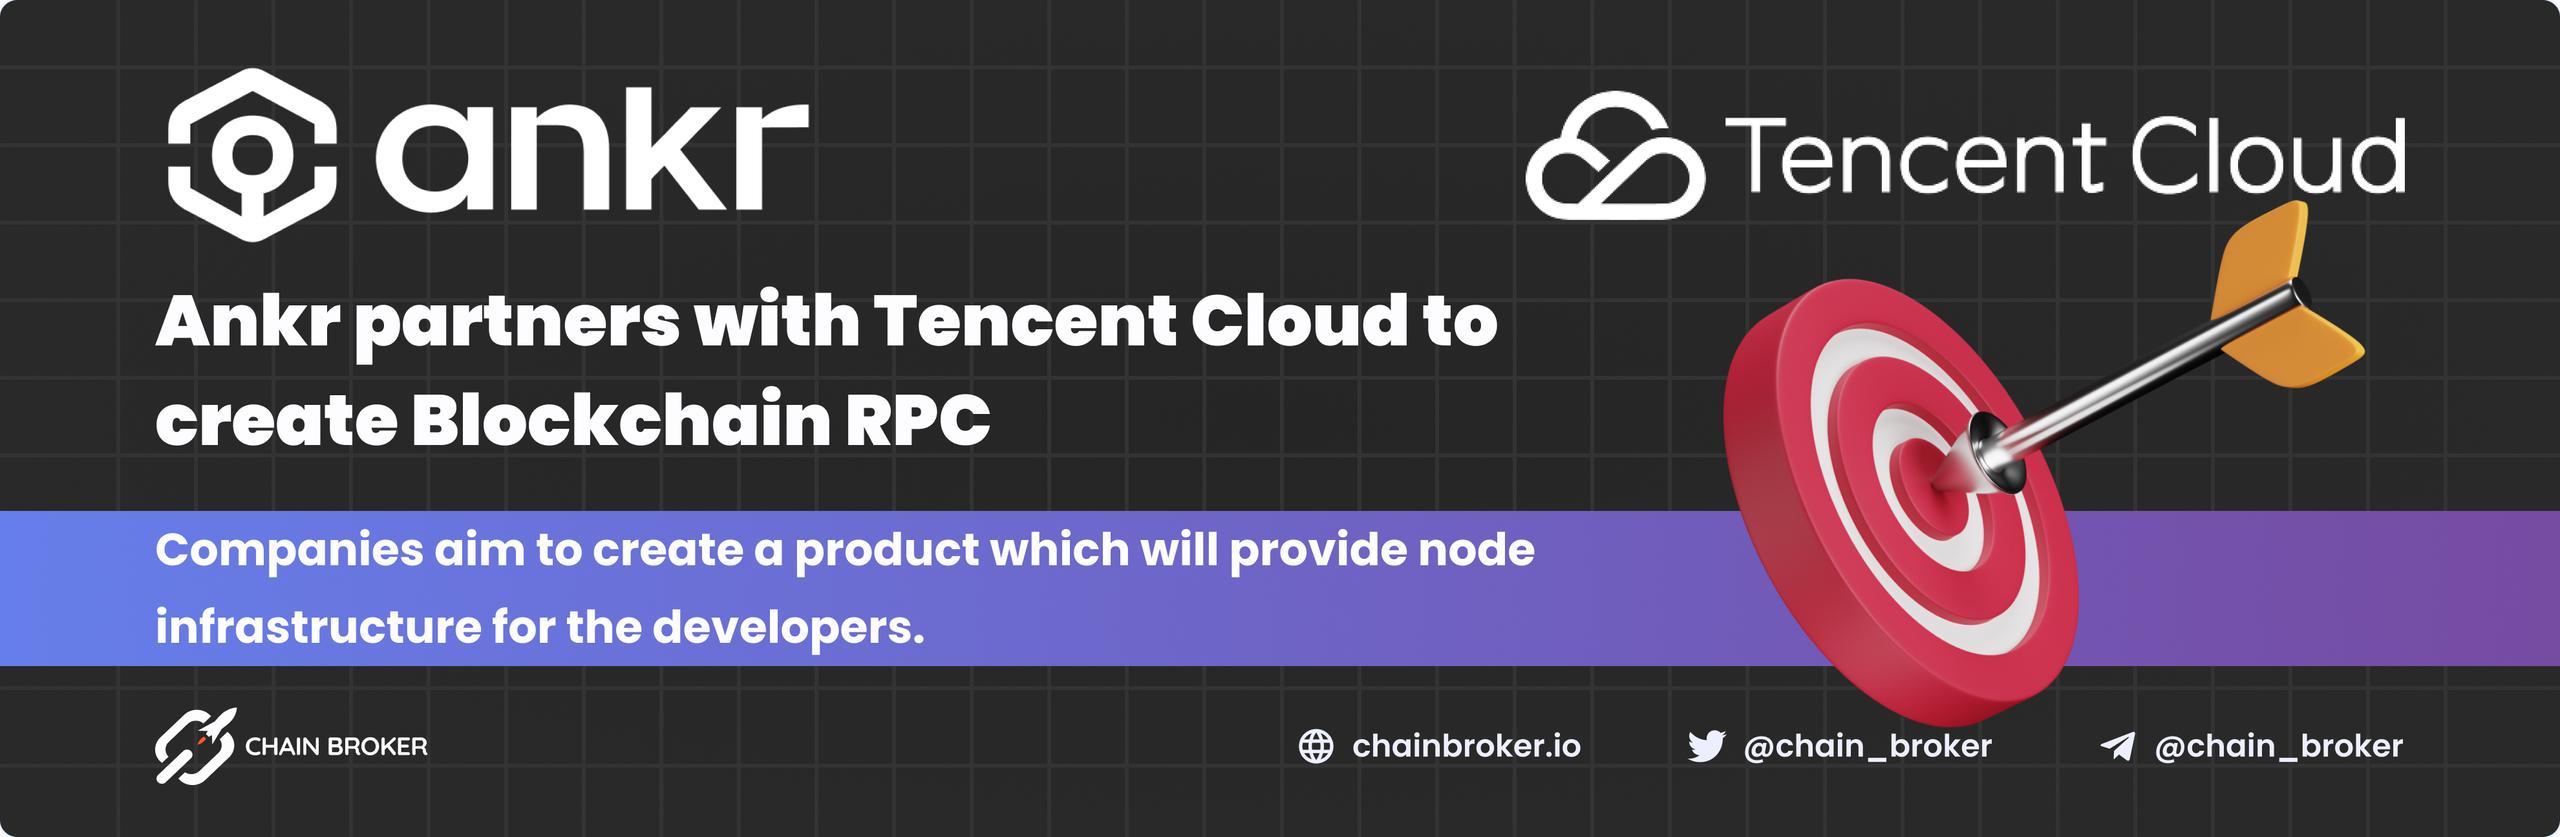 Ankr partners with Tencent Cloud to create Blockchain RPC.